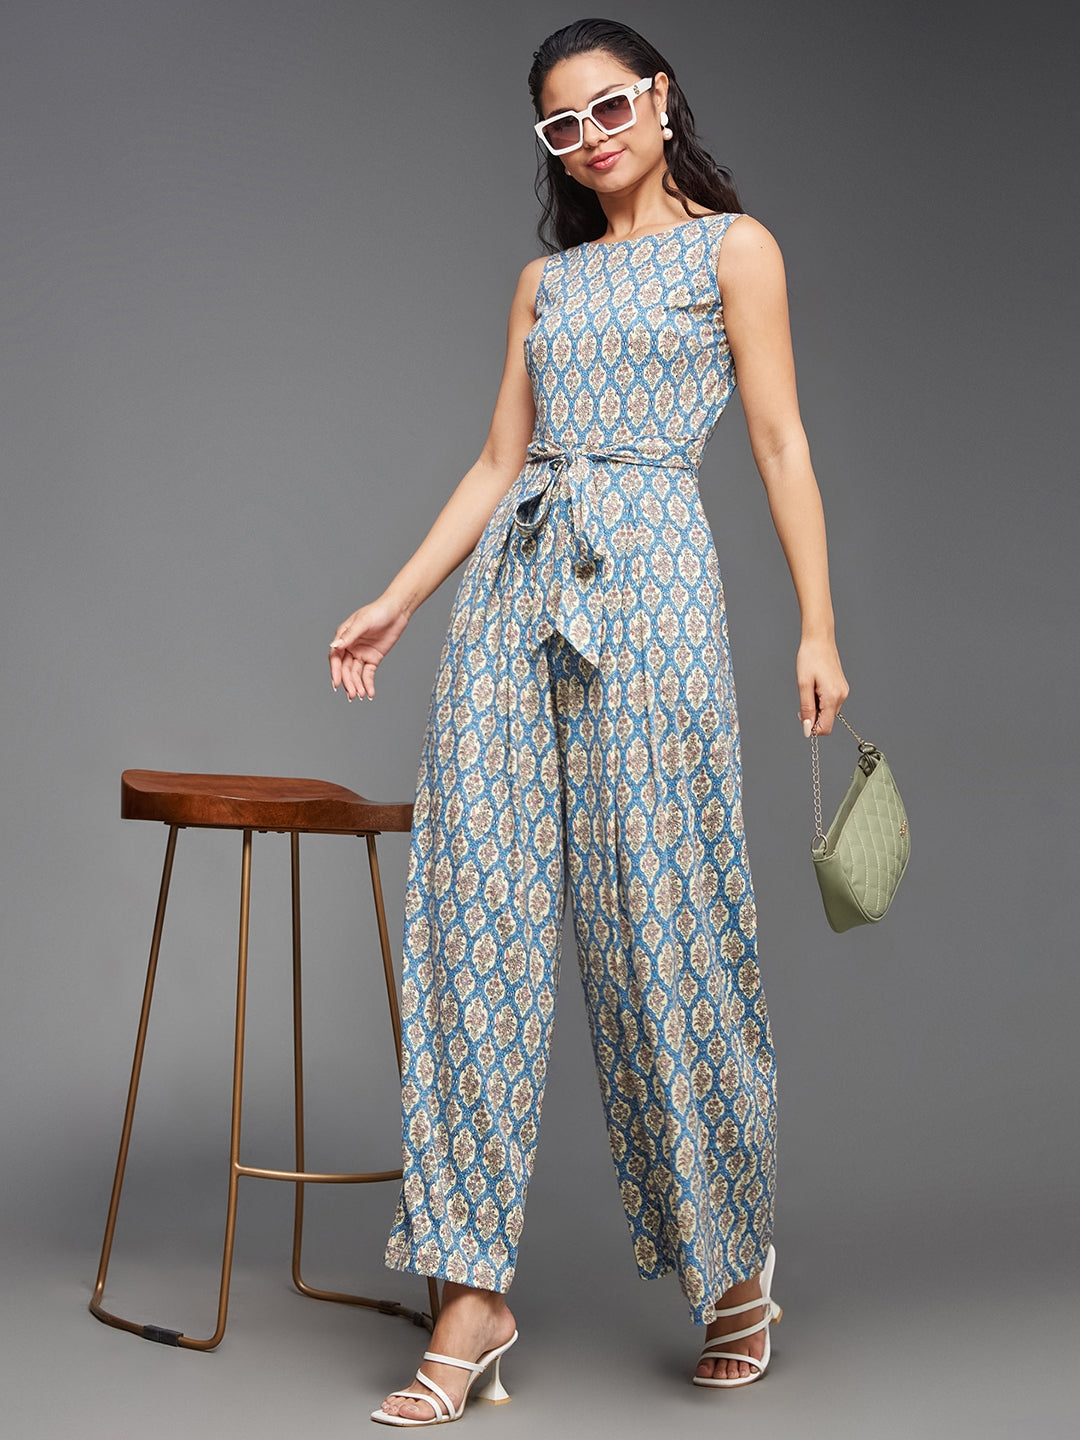 Multicolored-Base-Off White Boat Neck Sleeveless Bohemian-Patterned Pleated Pure Cotton Regular-Length Jumpsuit